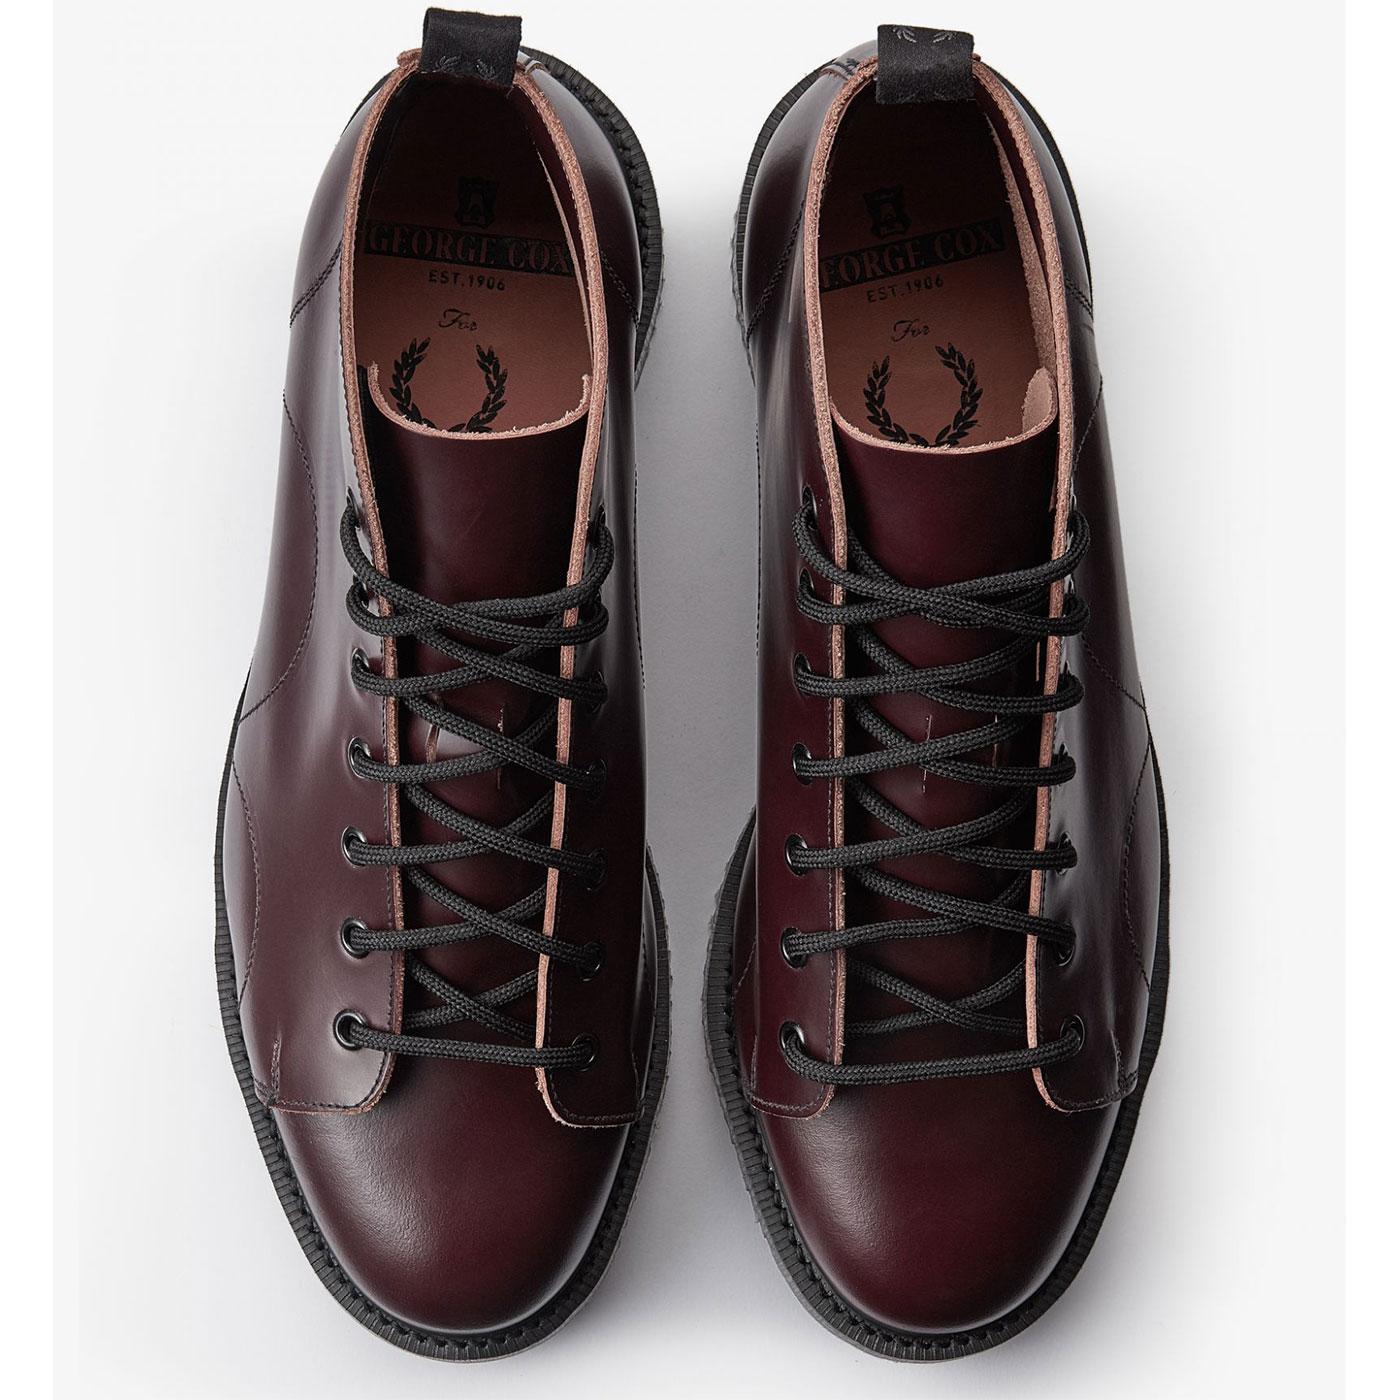 FRED PERRY X GEORGE COX Mod Monkey Boots in Oxblood